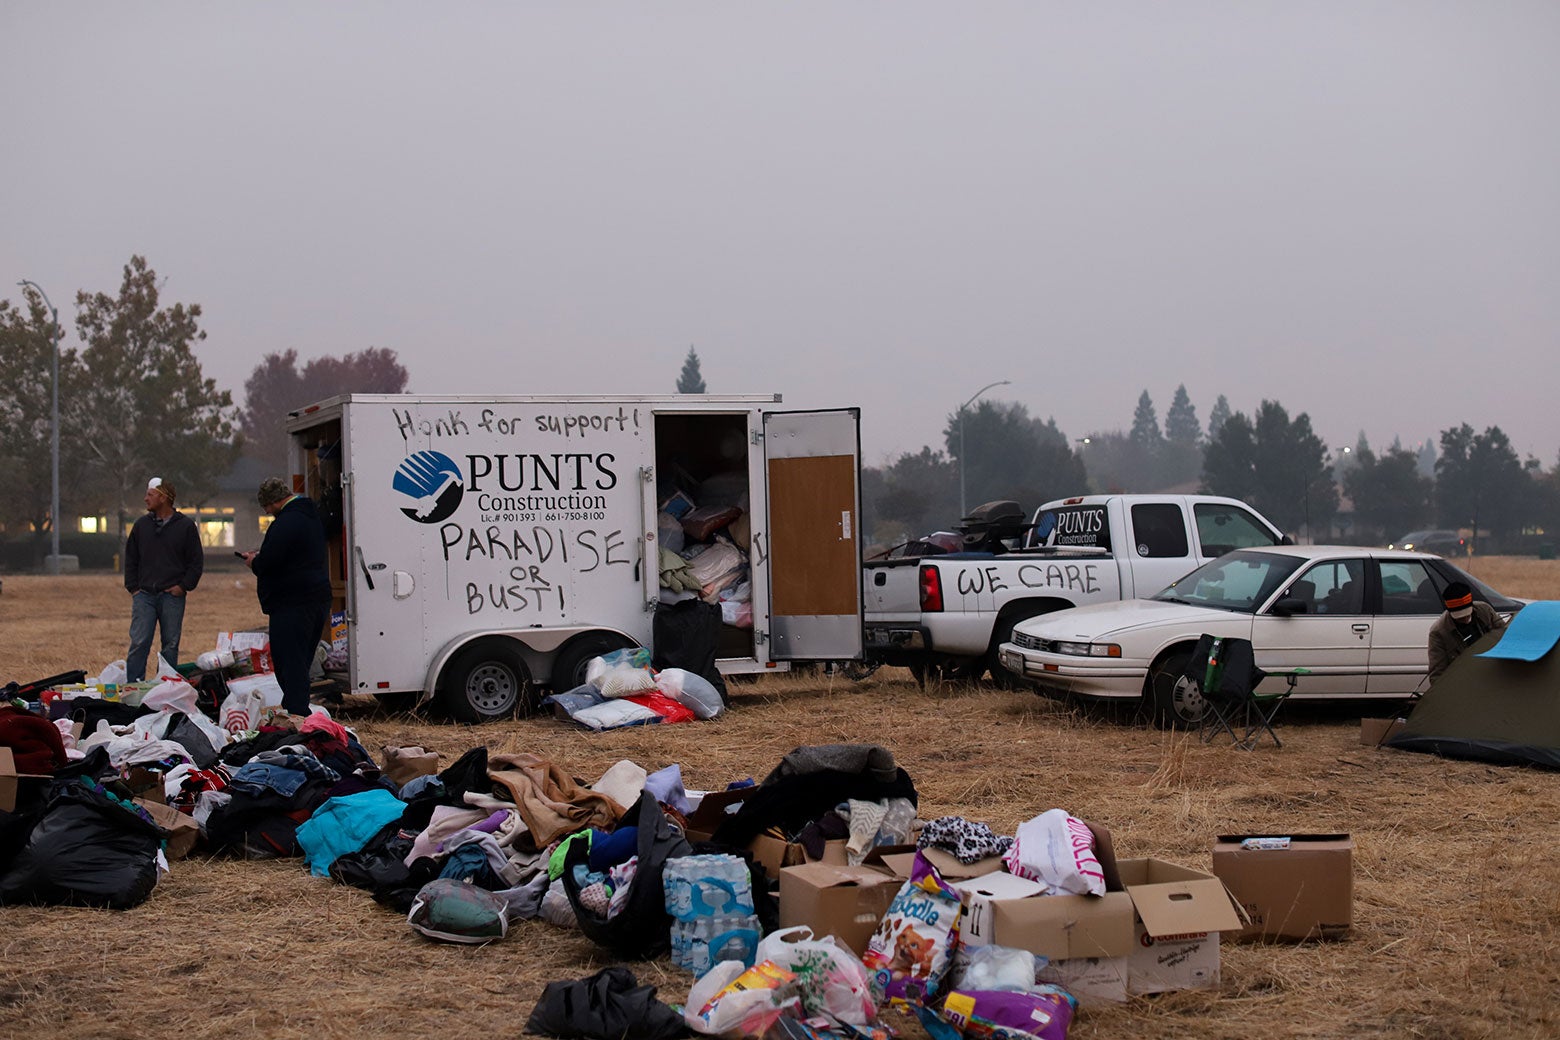 So many donations have been brought to the Walmart tent camp in Chico, California, that some go unclaimed.